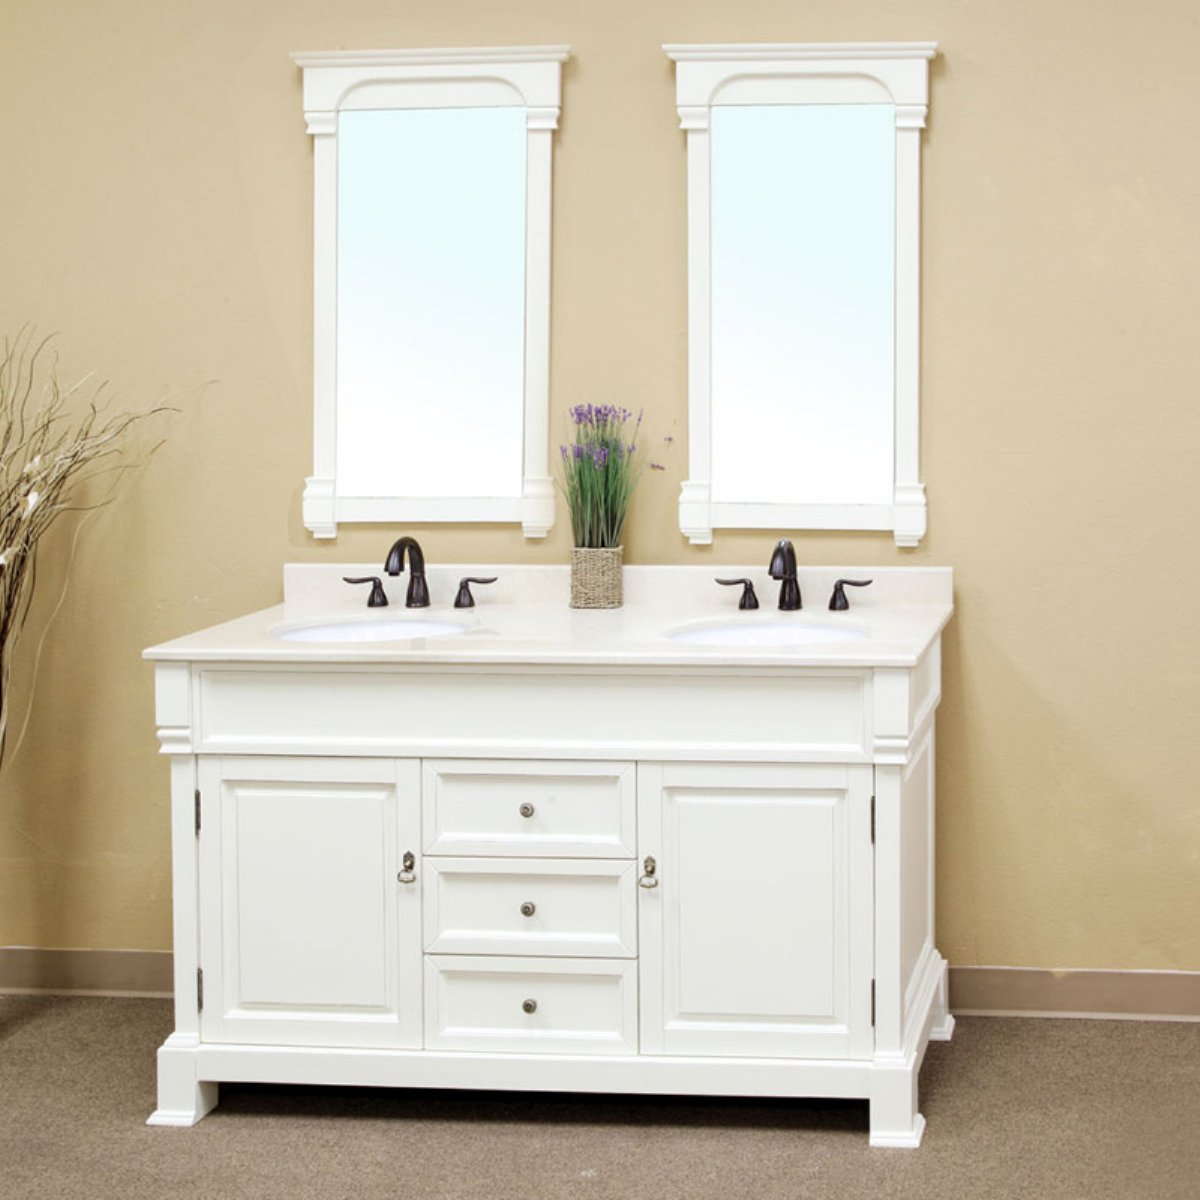 White Vanity Small Captivating White Vanity And Double Small Sinks Or Black Faucet Design Feat Contemporary Narrow Framed Bathroom Mirror Idea Bathroom  Several Stunning Ideas Of Bathroom Mirror 